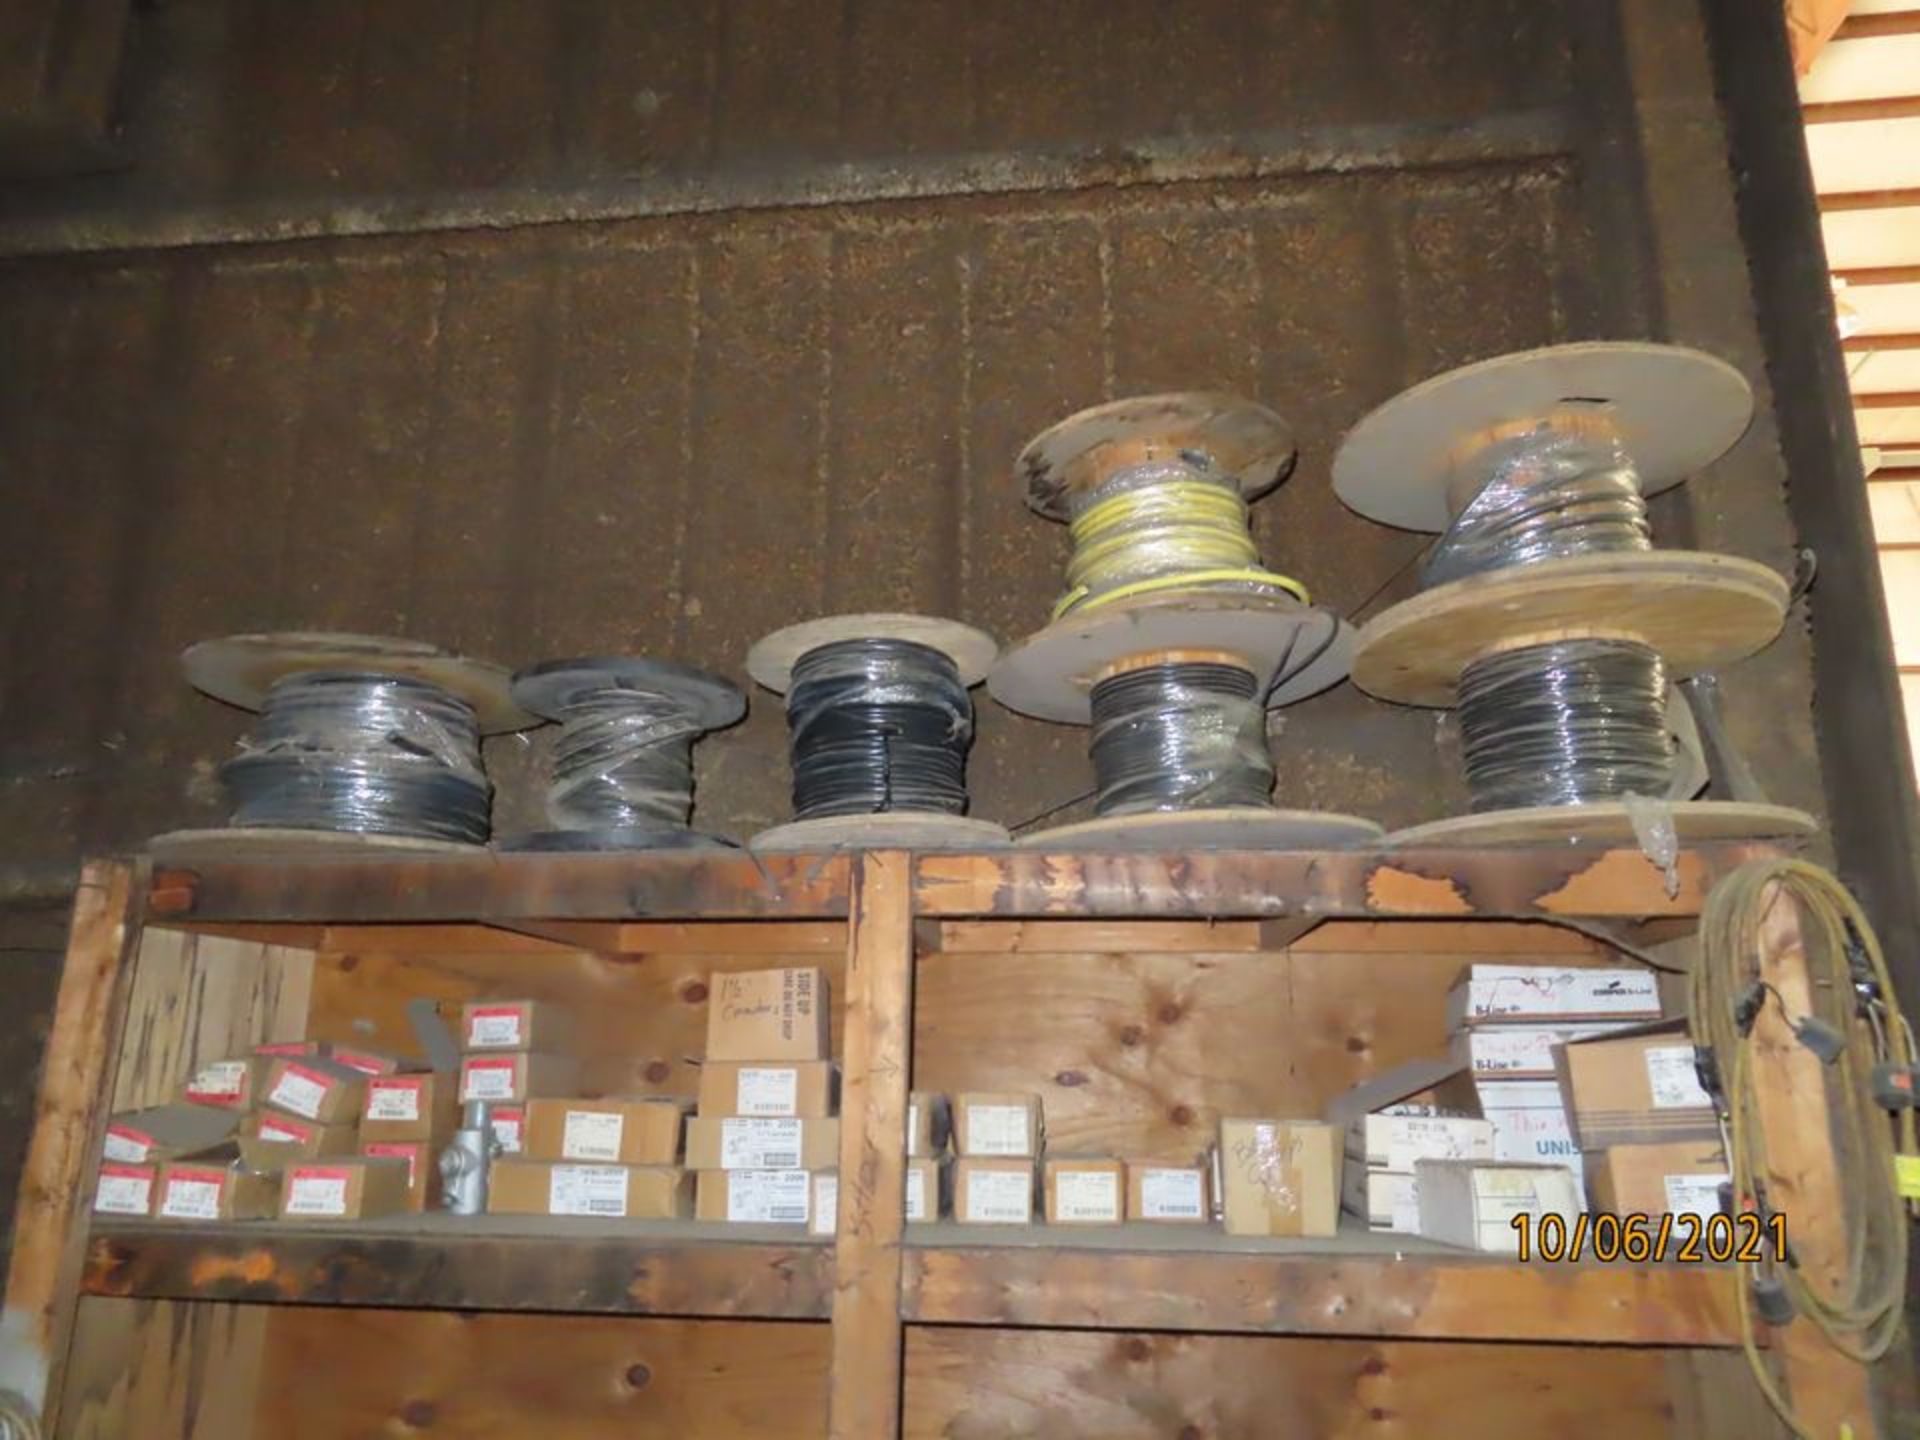 LOT CONTENTS OF SHELVES TO INCLUDE: ELECTRICAL CONDUIT, MISC. WIRE, ELEC. WIRE, MISC. ELECTRICAL FIT - Image 9 of 10